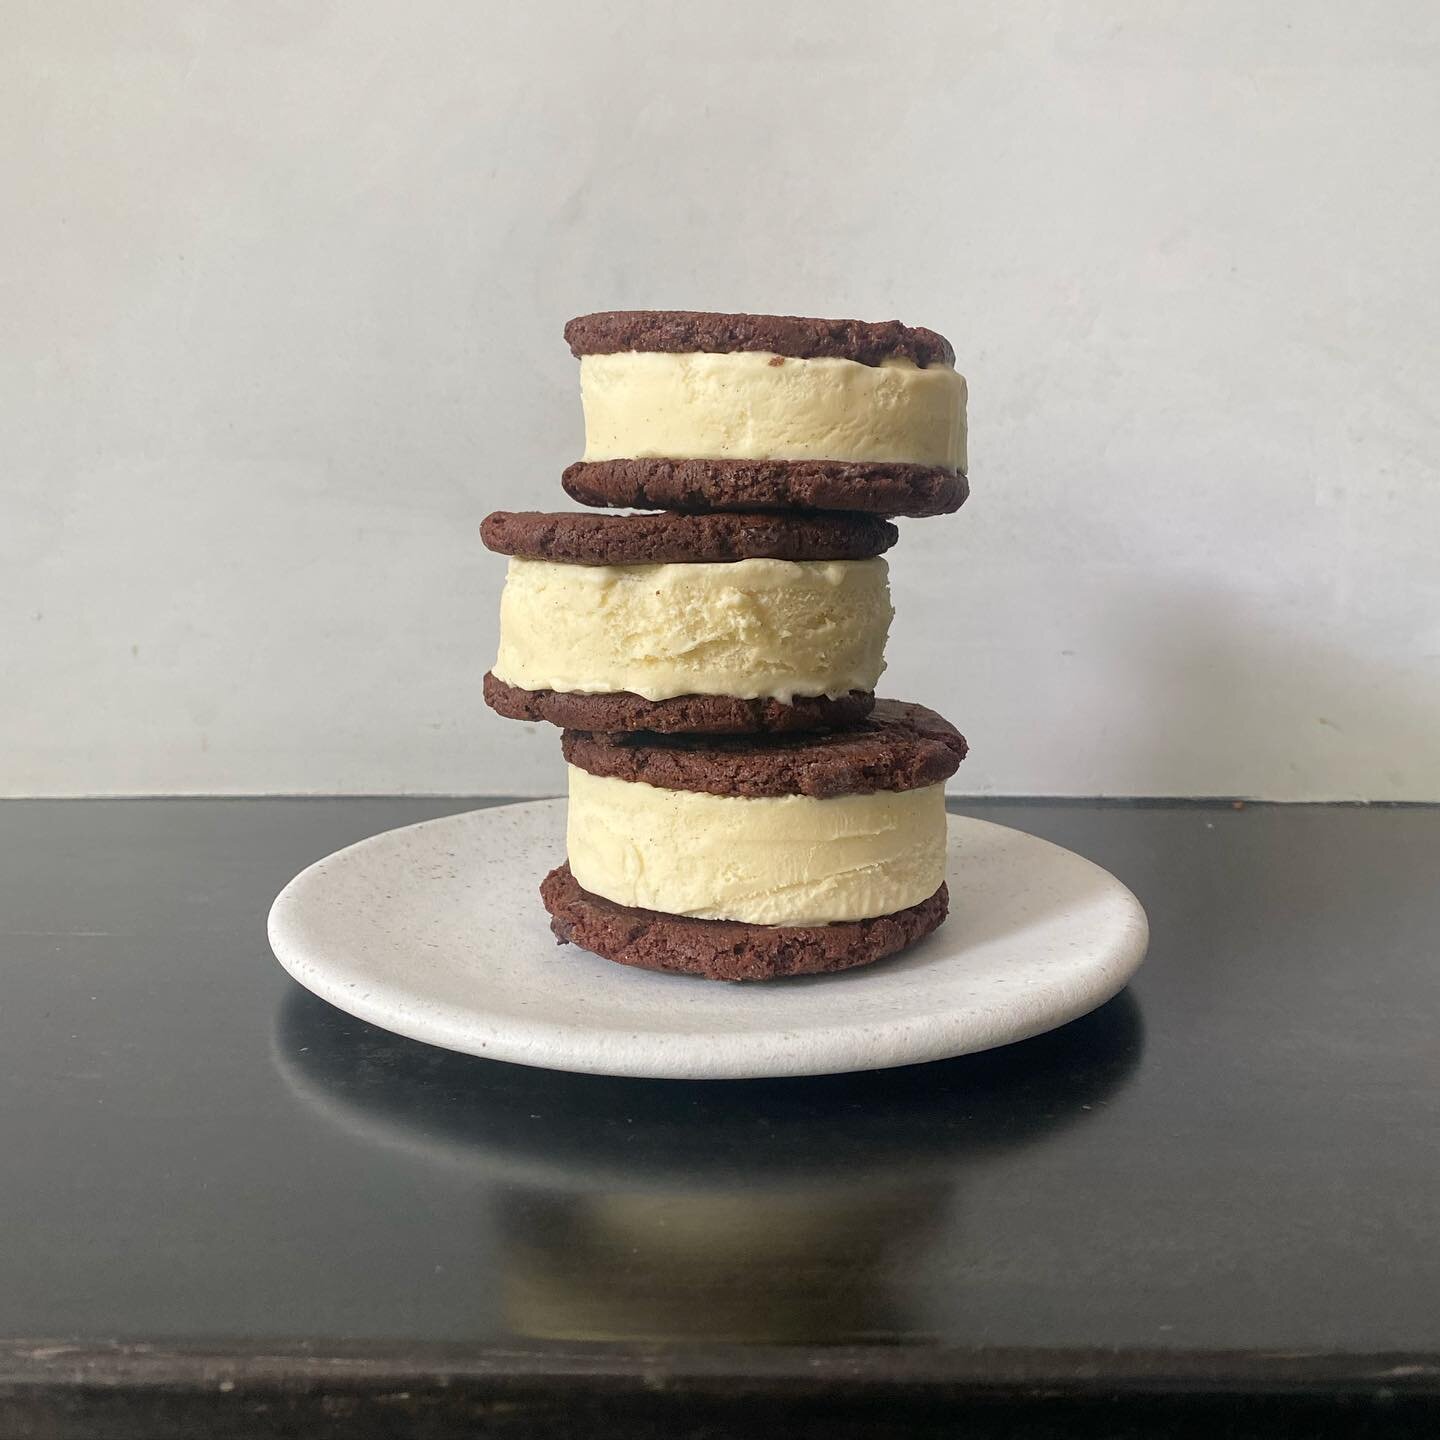 Ice Cream Sandwiches today @caletanyc ! Crazy Good Vanilla layered between 2x Chocolate Cookies. Limited supply